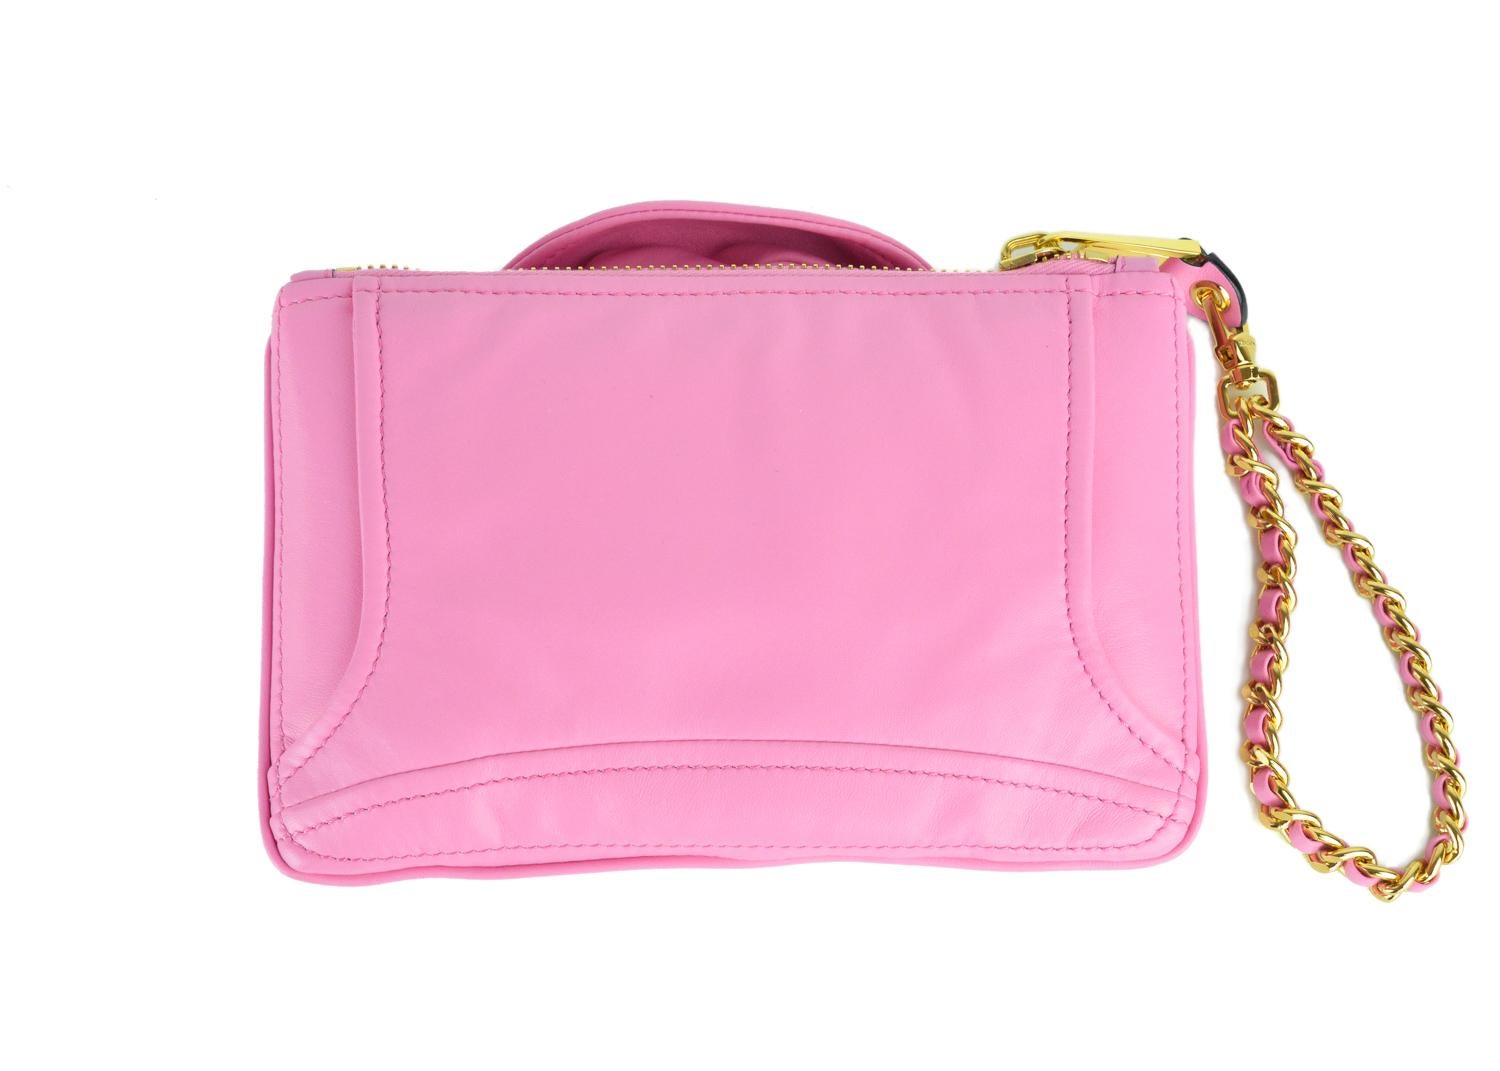 Moschino's iconic pink leather moto jacket in the form of a wristlet bag. Super chic and cute for a pop of style in your everyday look. Pair it with a classic white blouse denim jeans and nude heels for this bag to pop.

Leather
Approximately 9 inch